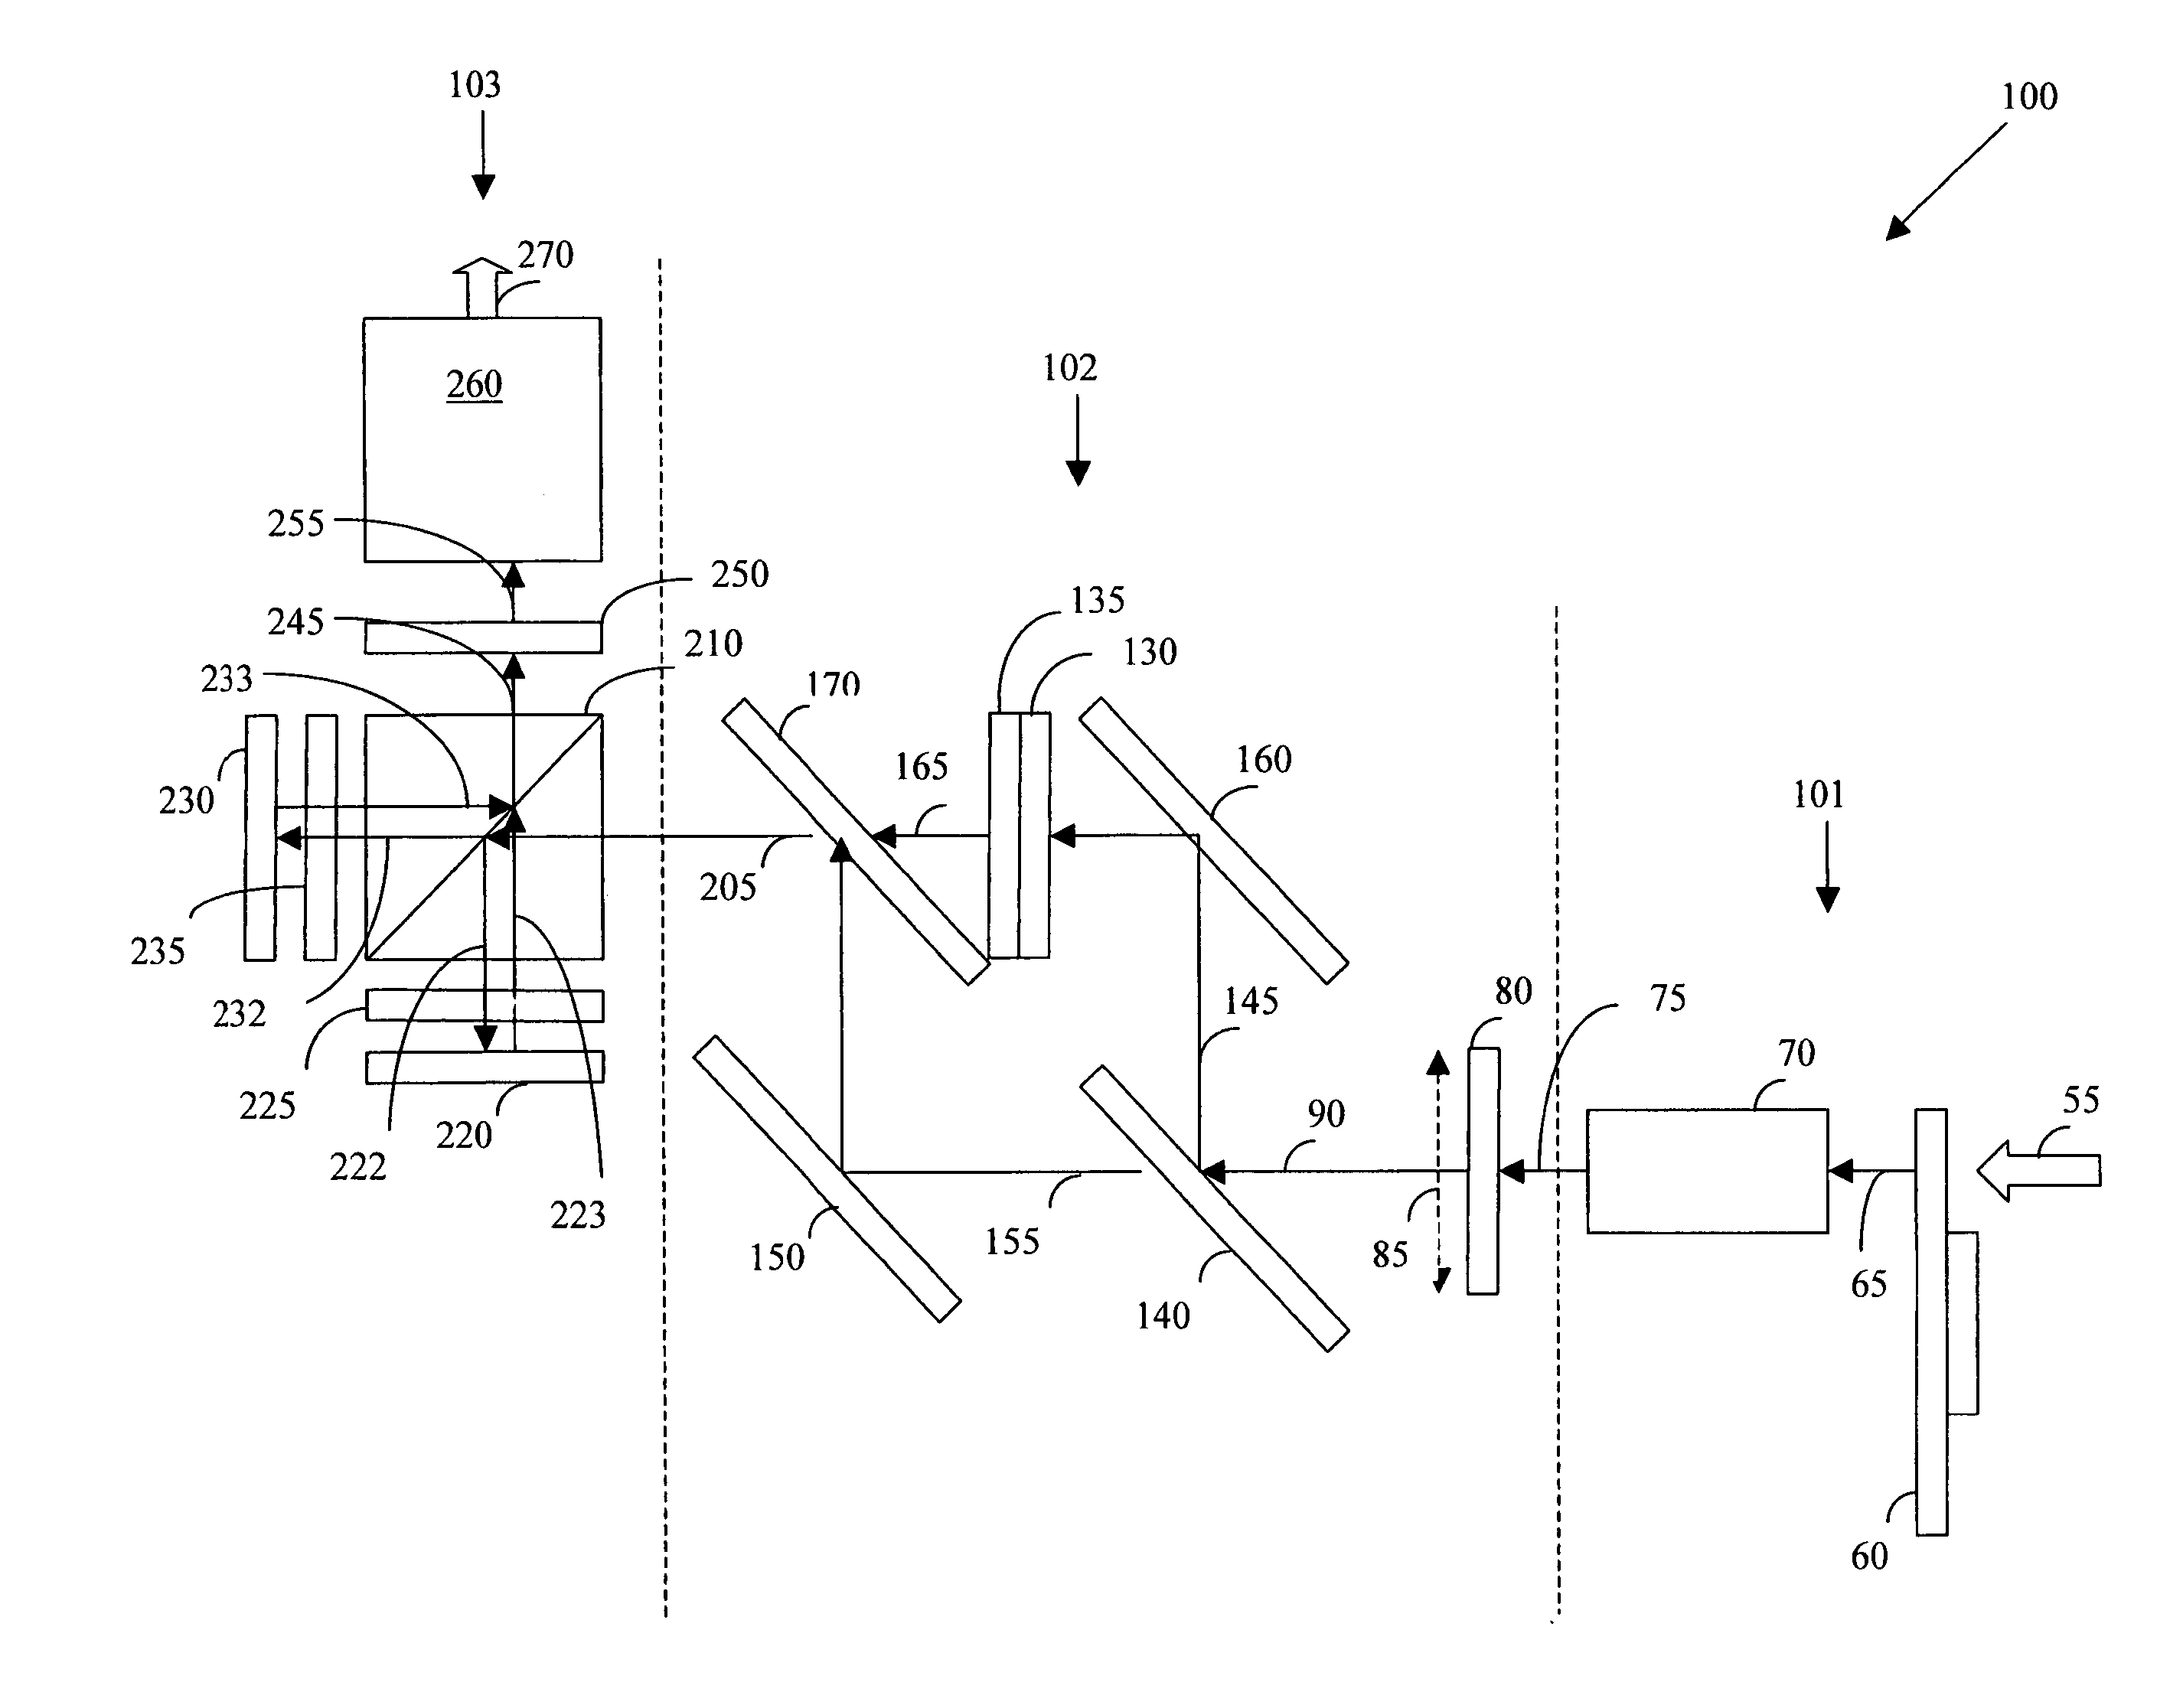 Two panel optical engine for projection applications